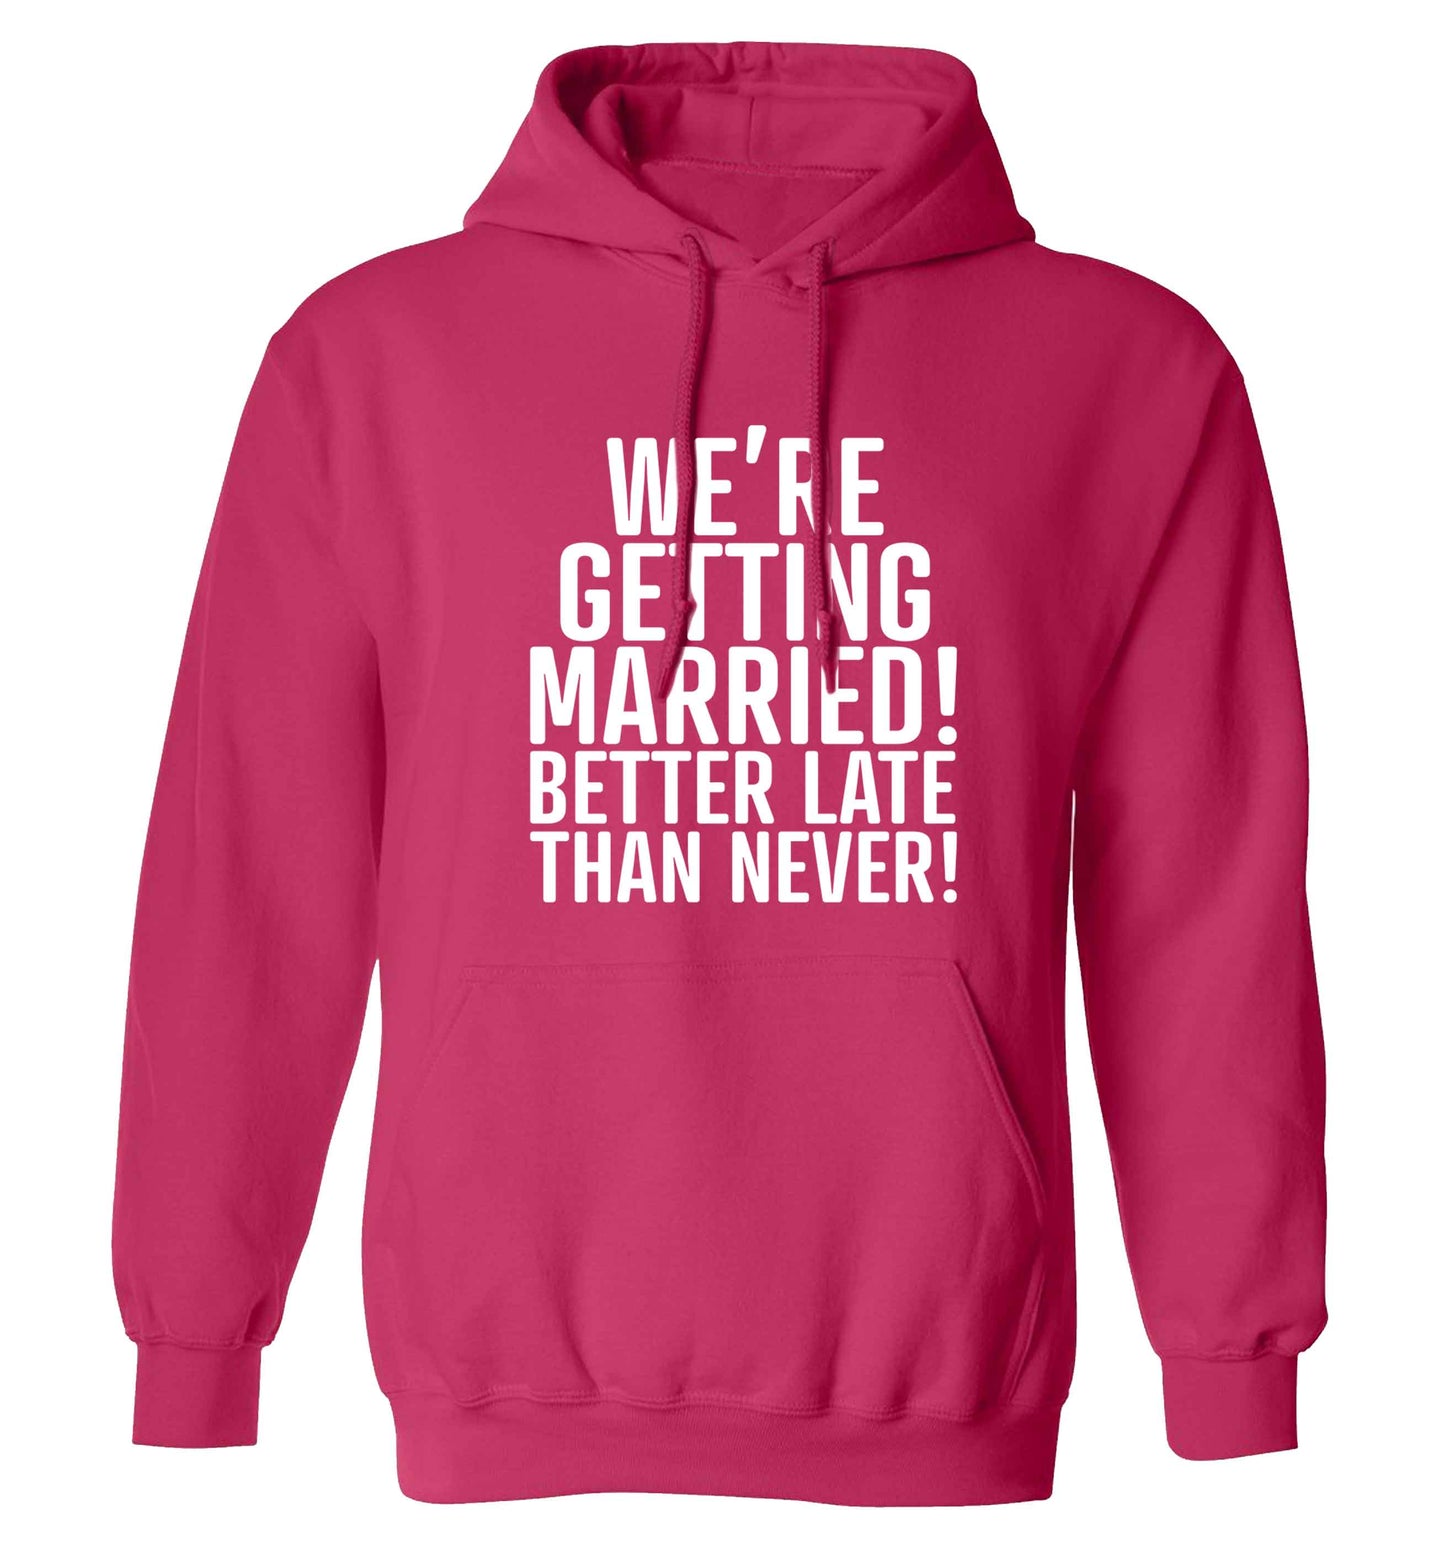 Always the bridesmaid but never the bride? Until now! adults unisex pink hoodie 2XL